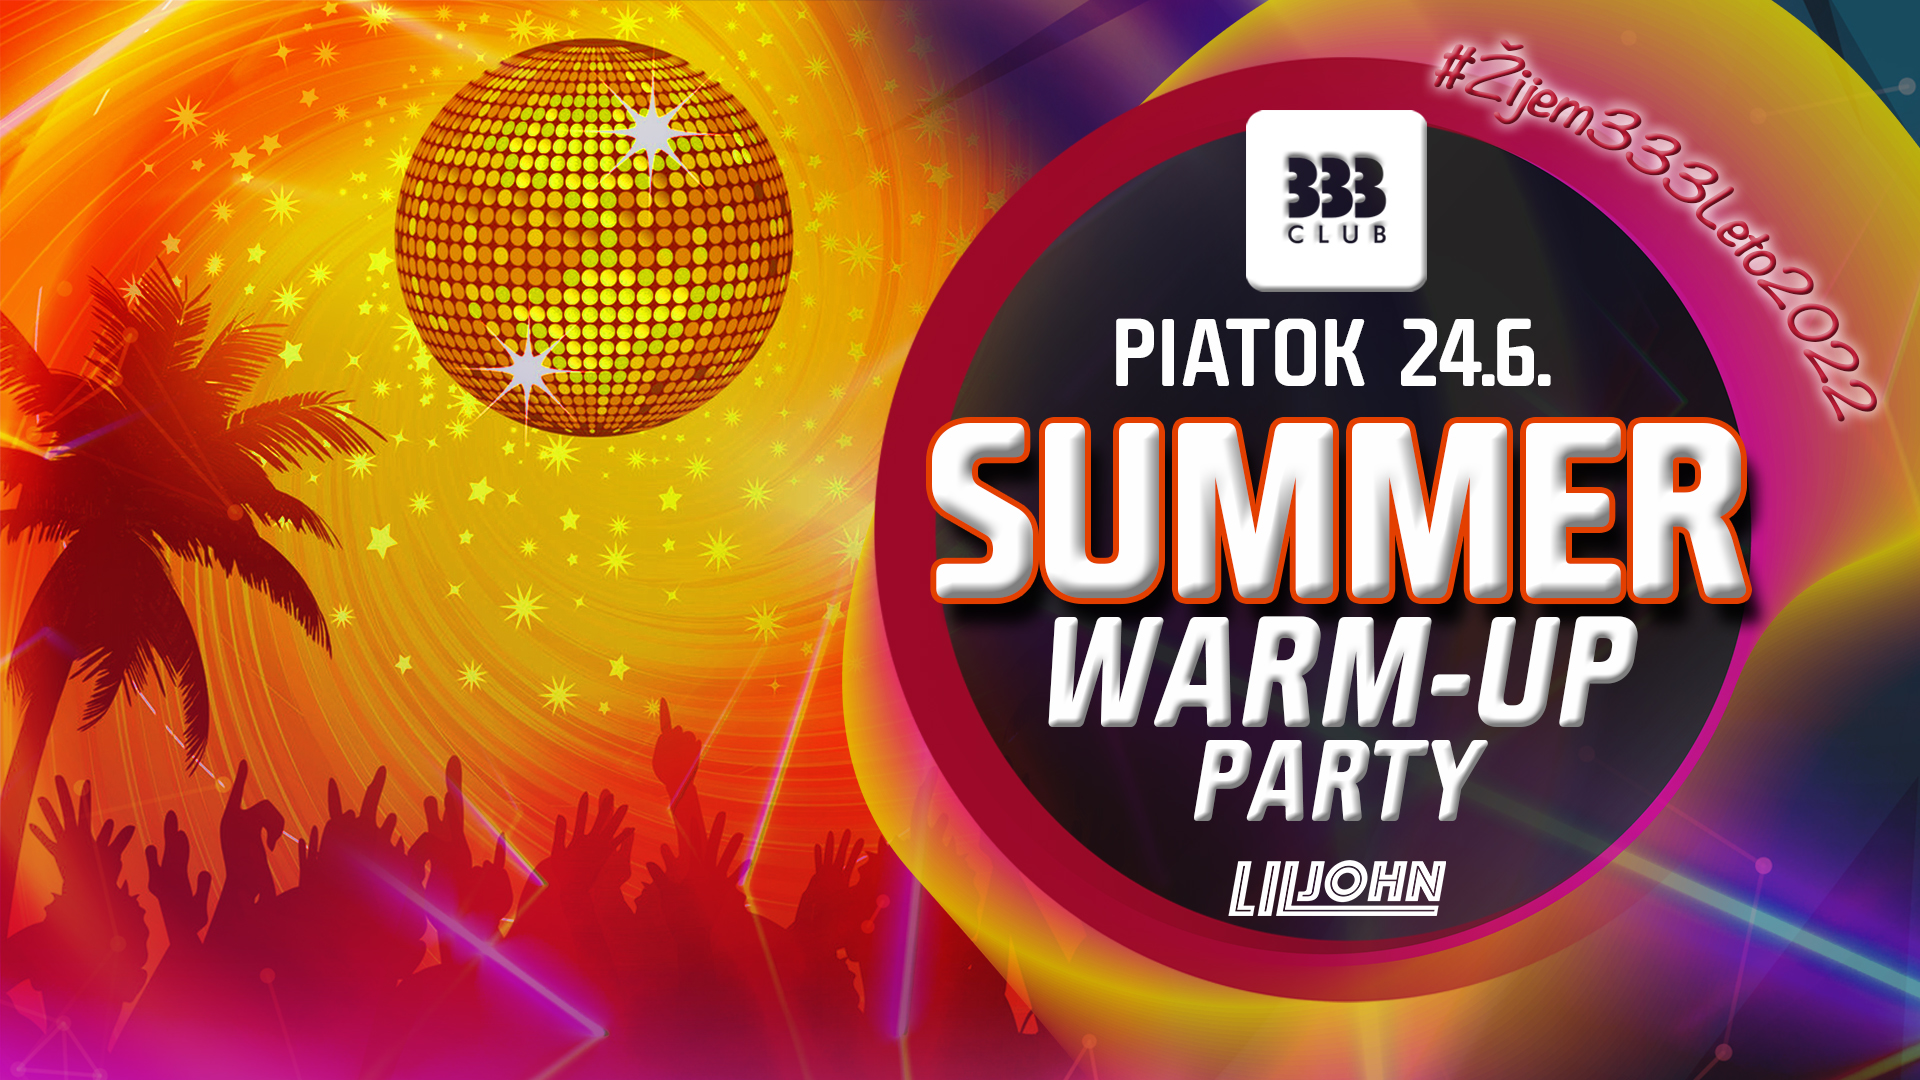 ☼ SUMMER Warm-UP Party ☼ 24.6.